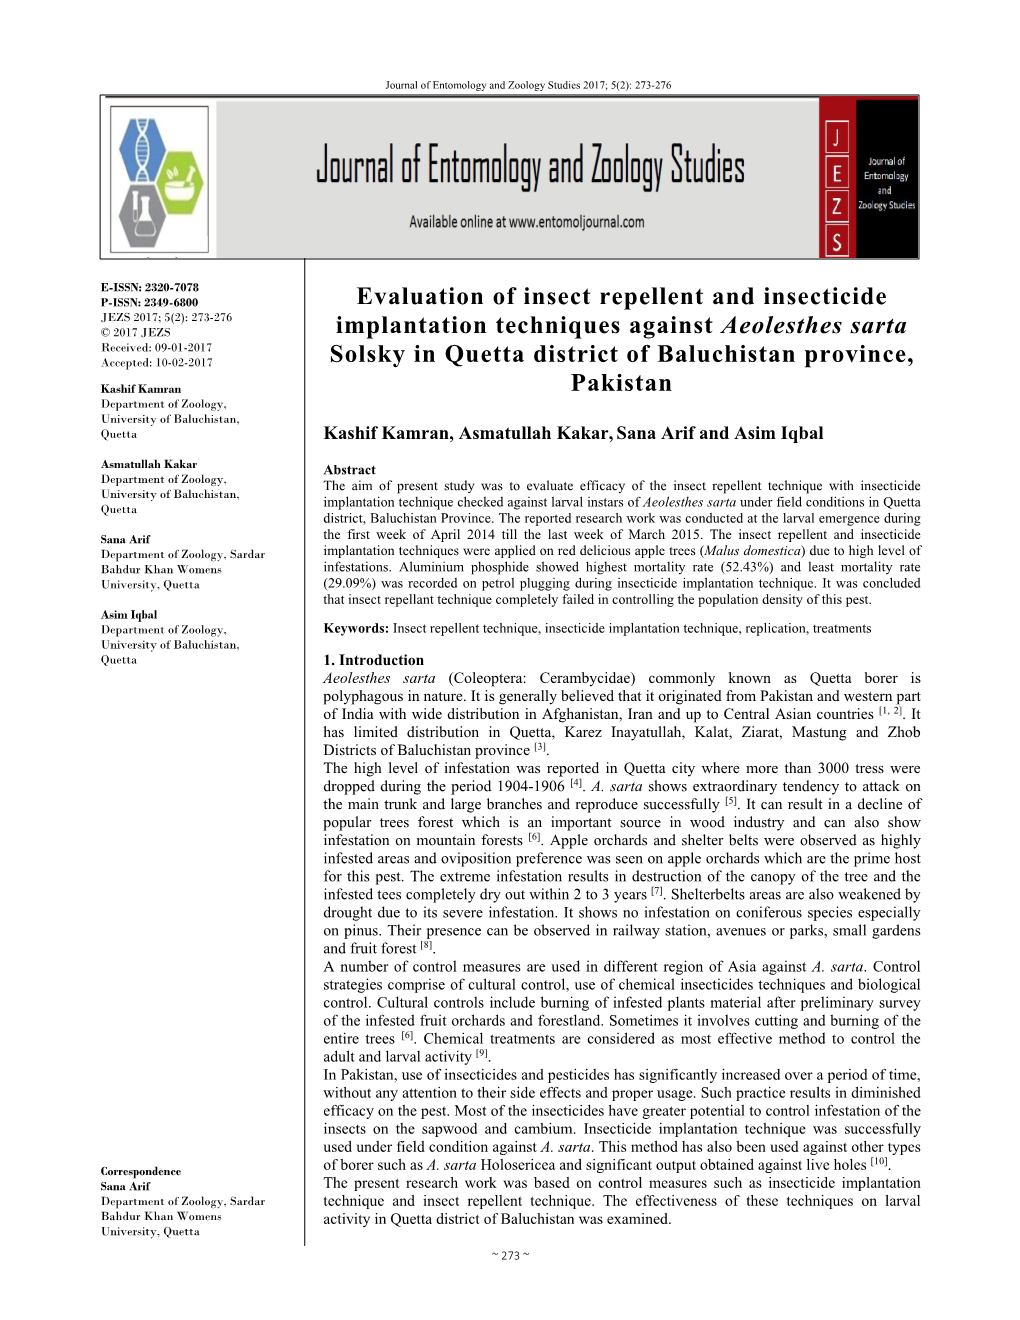 Evaluation of Insect Repellent and Insecticide Implantation Techniques